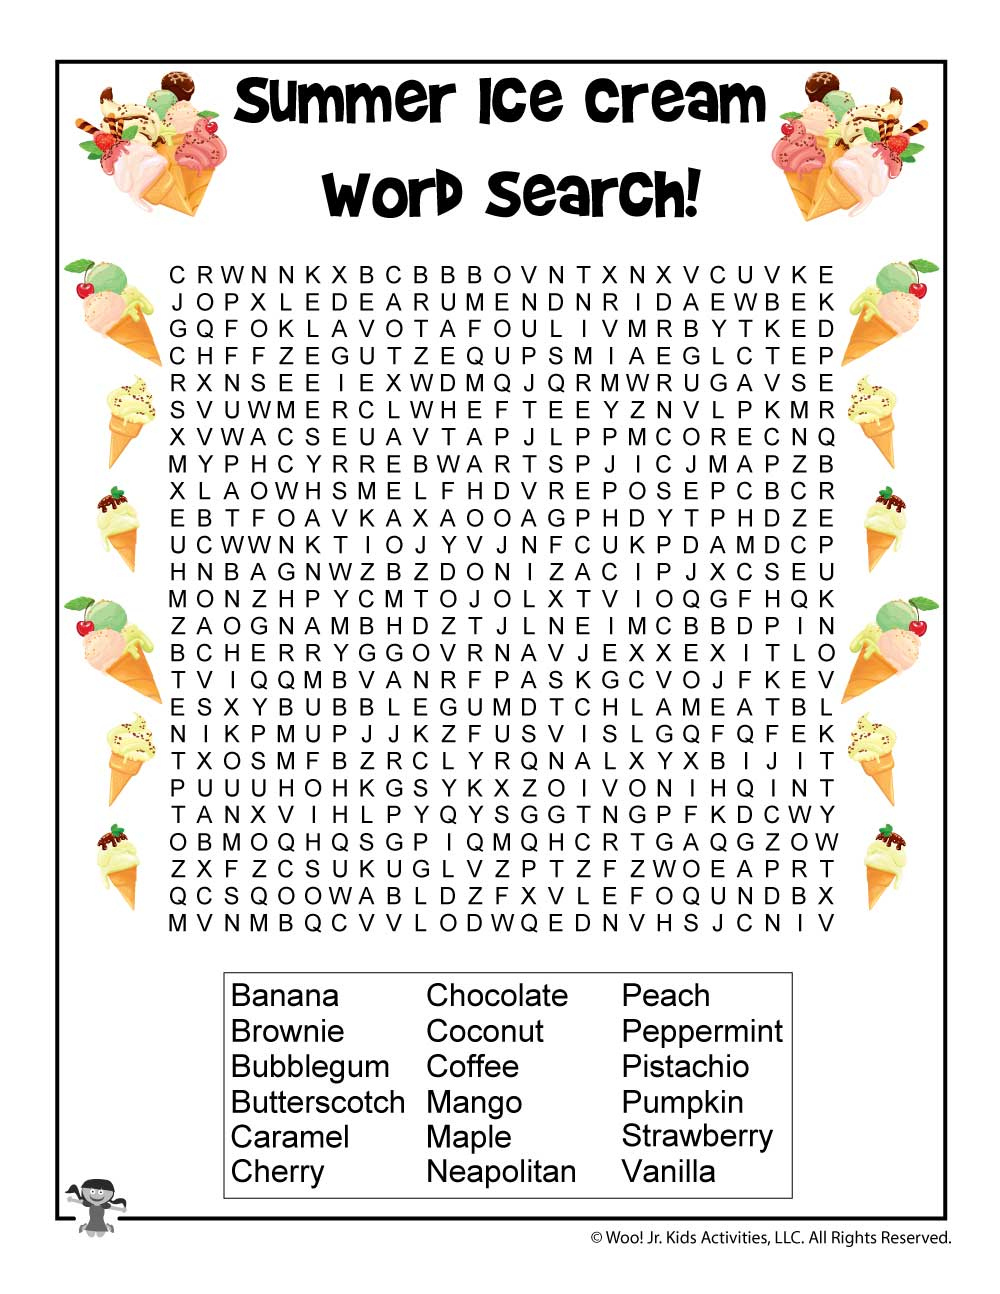 Ice Cream Flavors Word Search Wordmint Word Search Printable